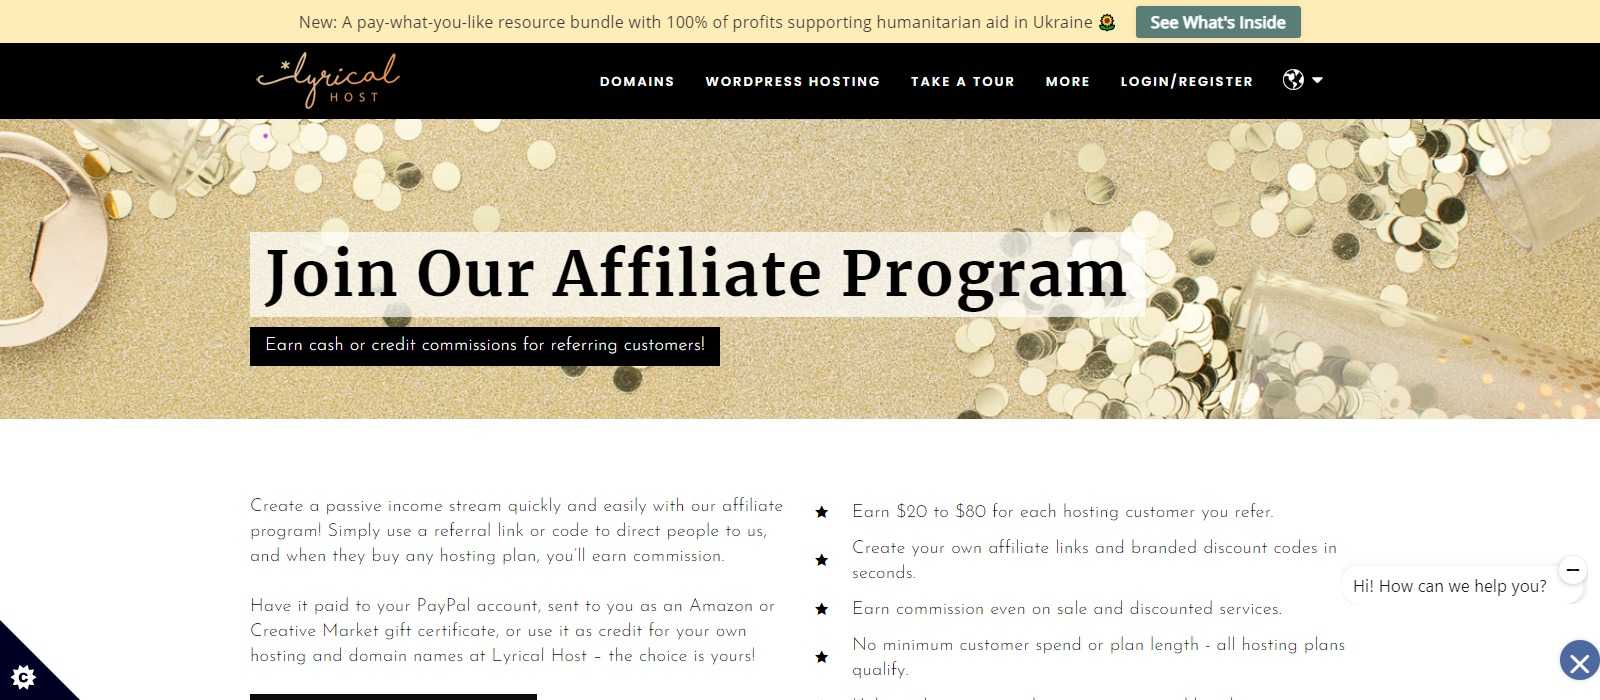 Lyrical Host Affiliates Program Review: Earn $20 - $80 Commission on Each Sale